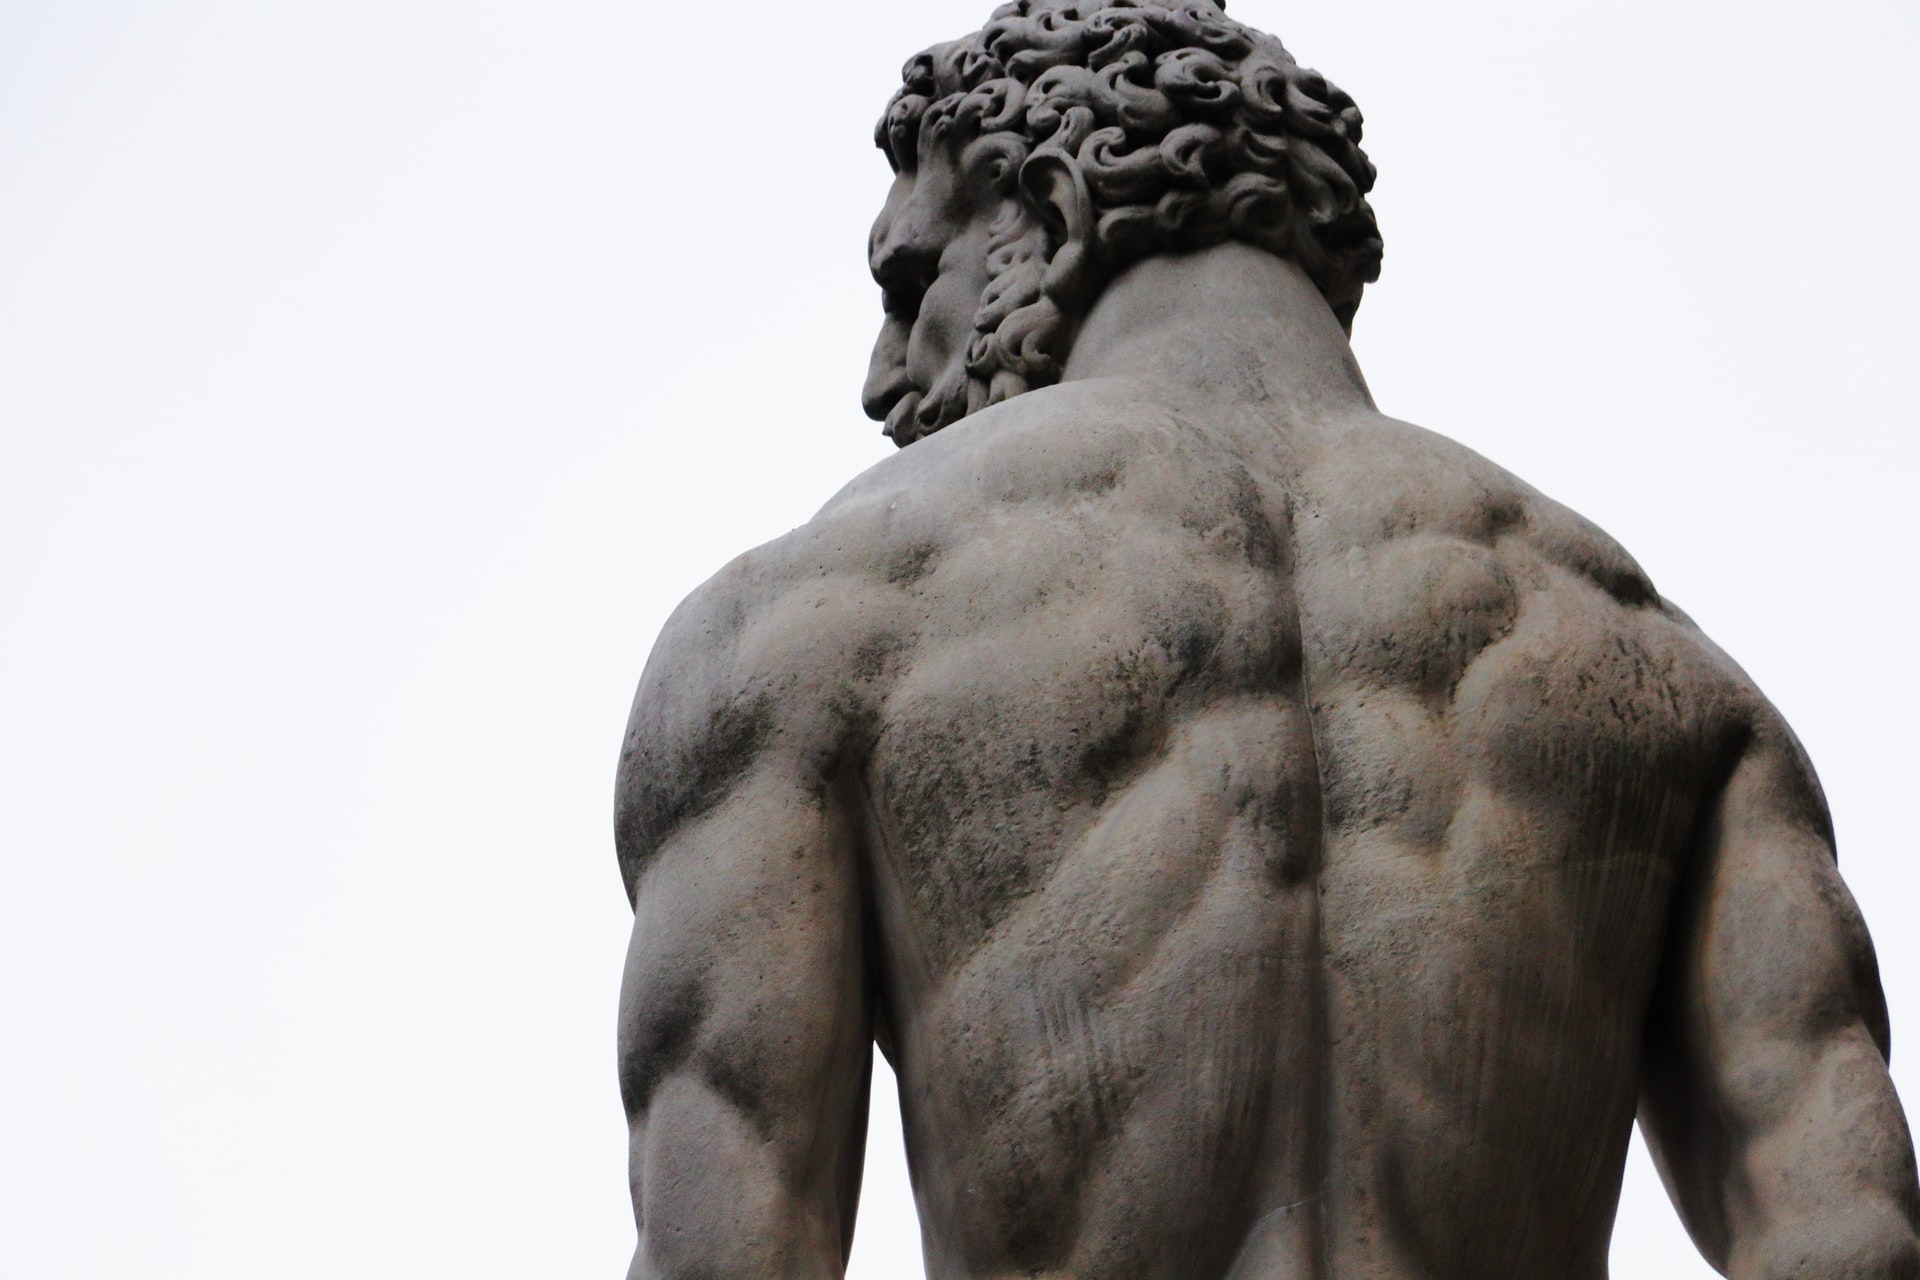 Statue of muscular man seen from behind